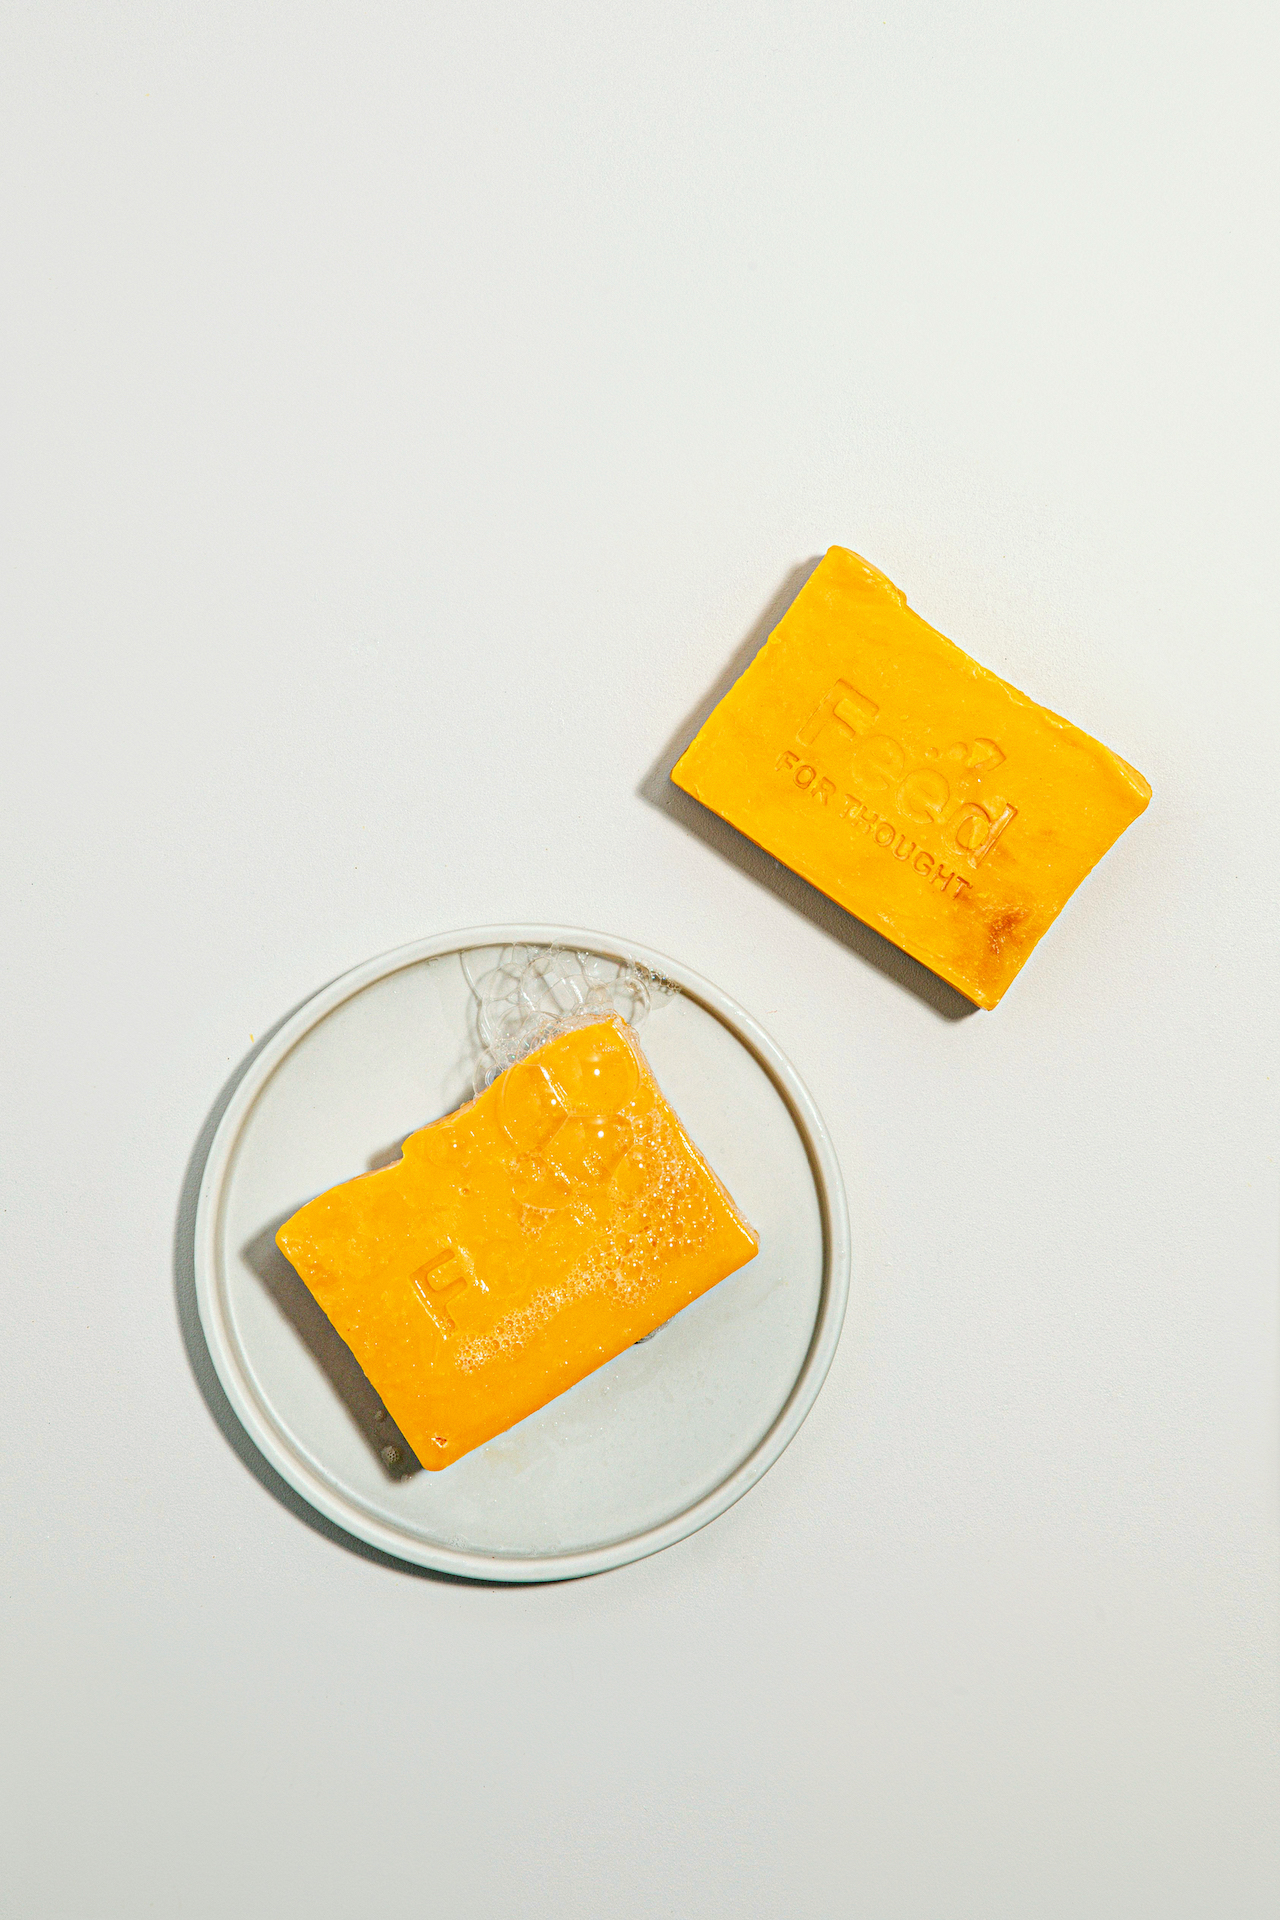 Two bars of eco soap